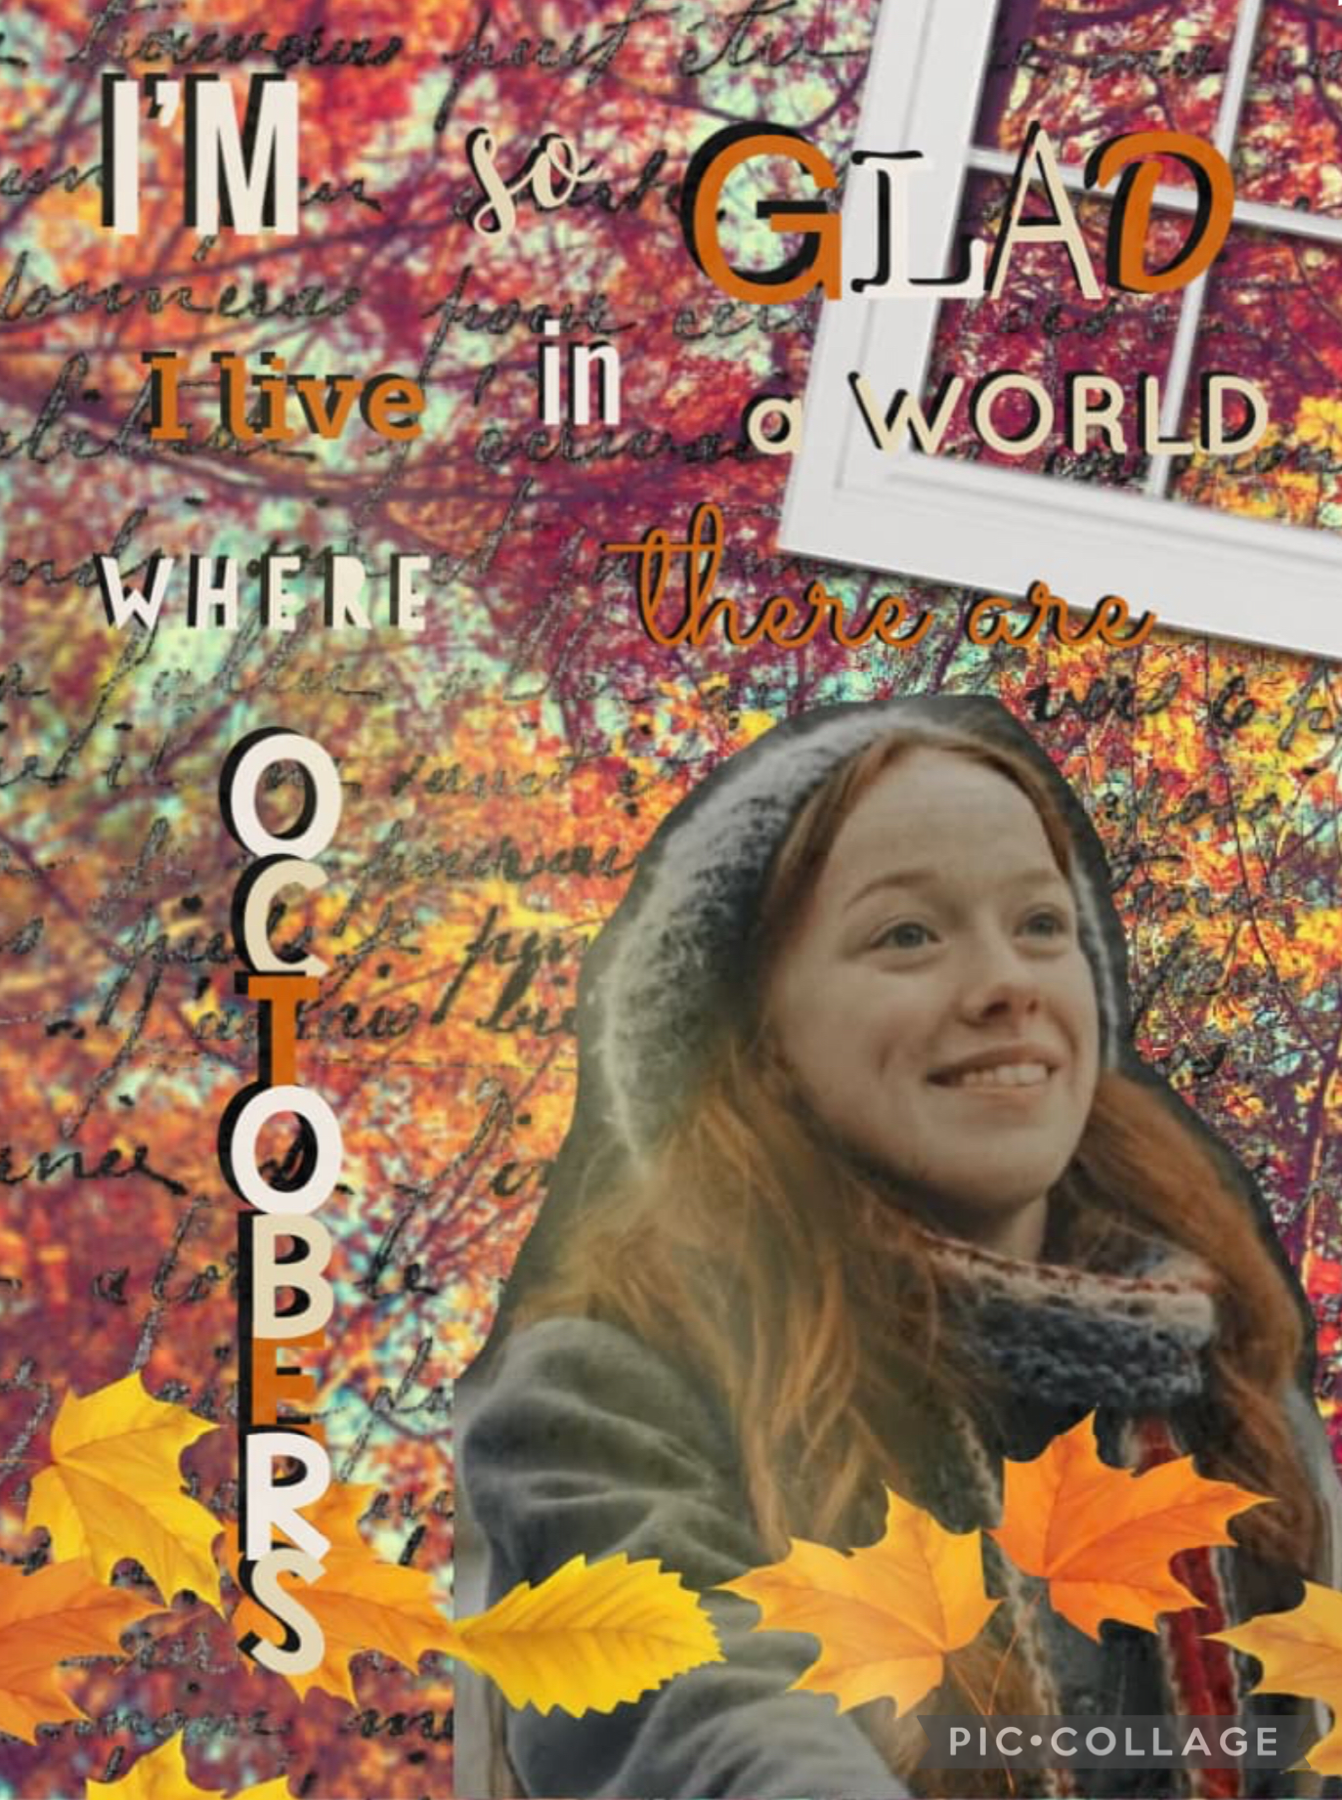 🍂TAP🍂
Collab with Breathin_Dreams
🍂Autumn aesthetic collage🍂
Quote from “Anne of green gables”